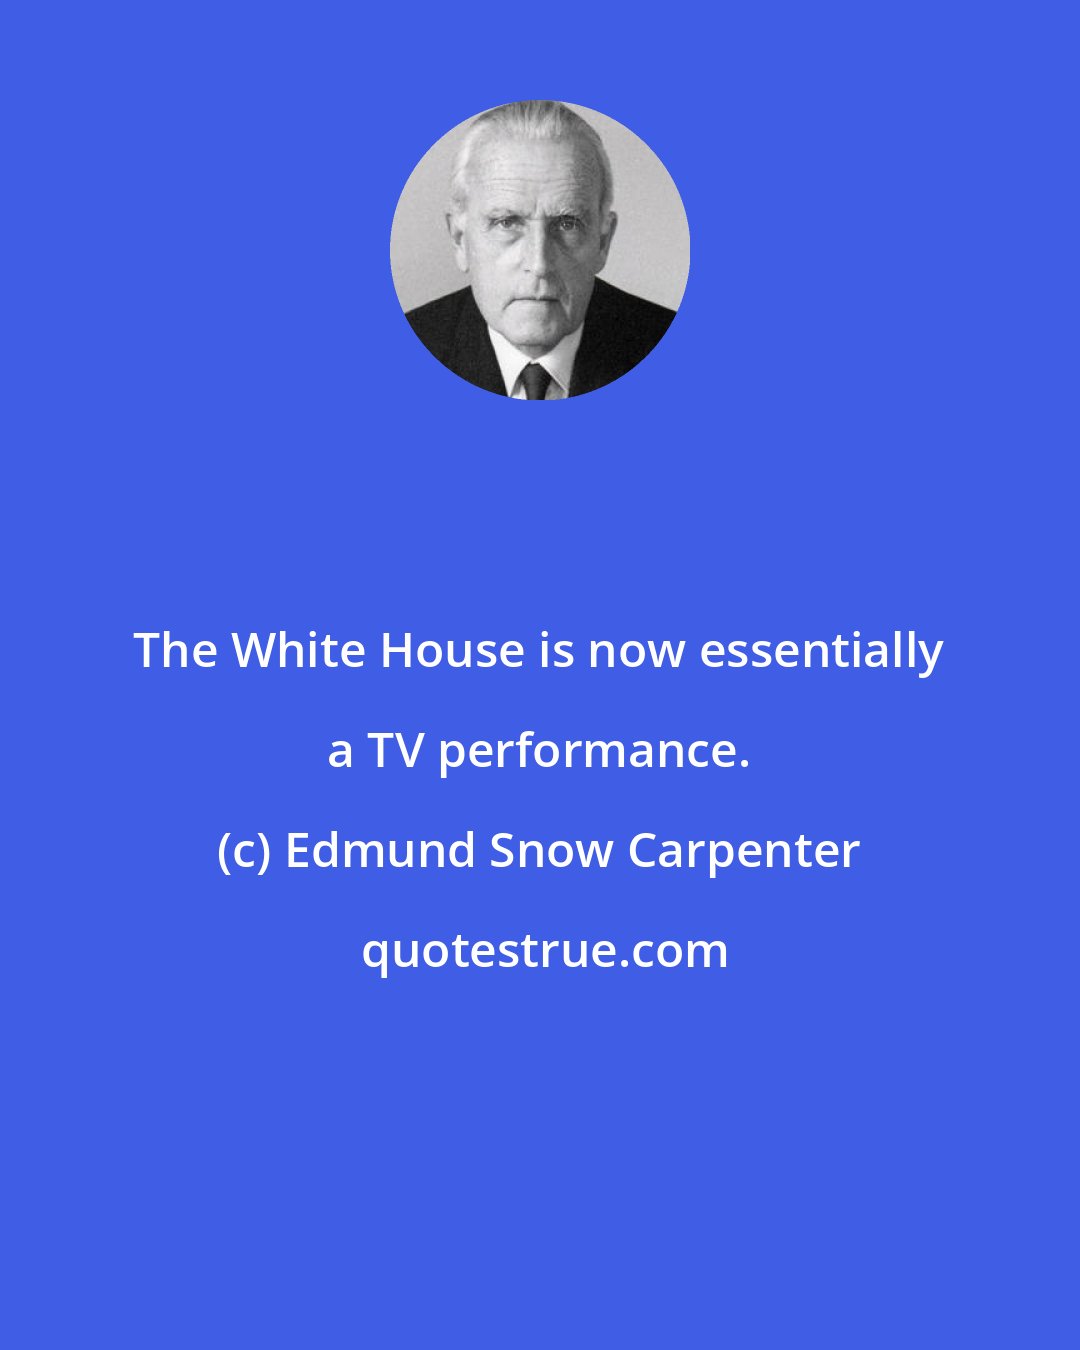 Edmund Snow Carpenter: The White House is now essentially a TV performance.